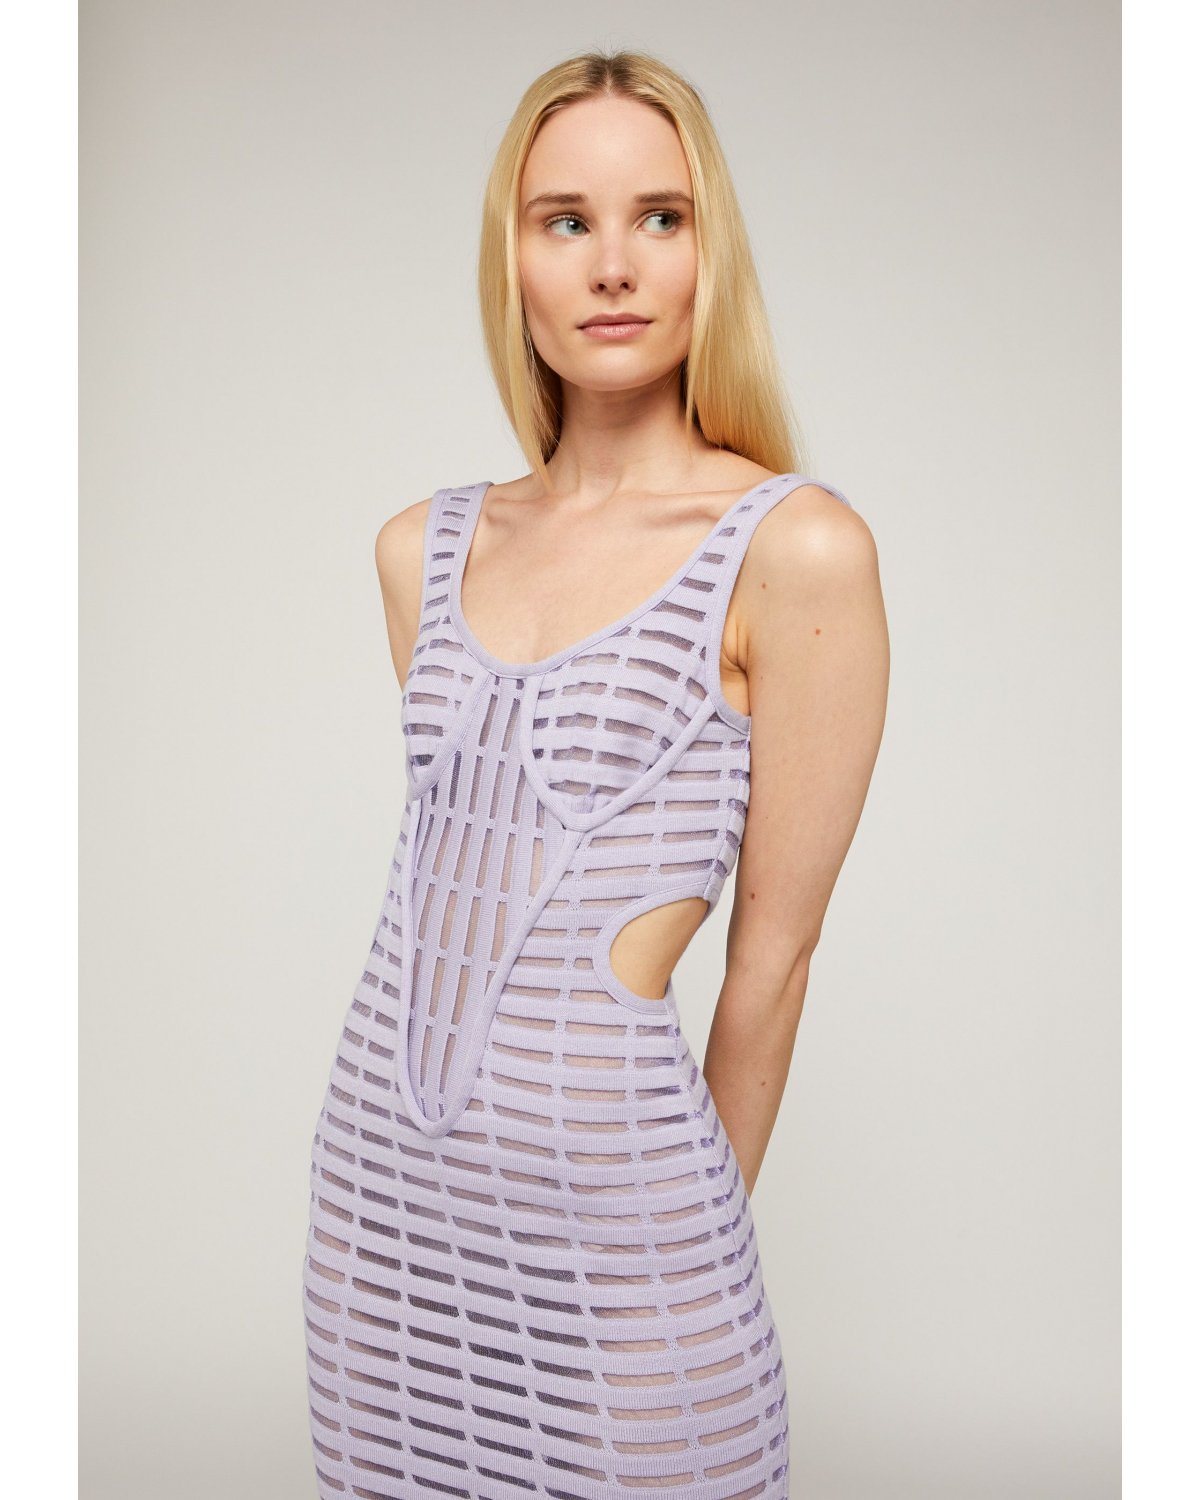 Iconic dress with cut-out | Spring Summer 2023 Collection, 73_74, Cruise 2023 Collection, Warm weather wear, International women's day, Ready to Wear, Iconic Capsule Collection, Spring days | Genny